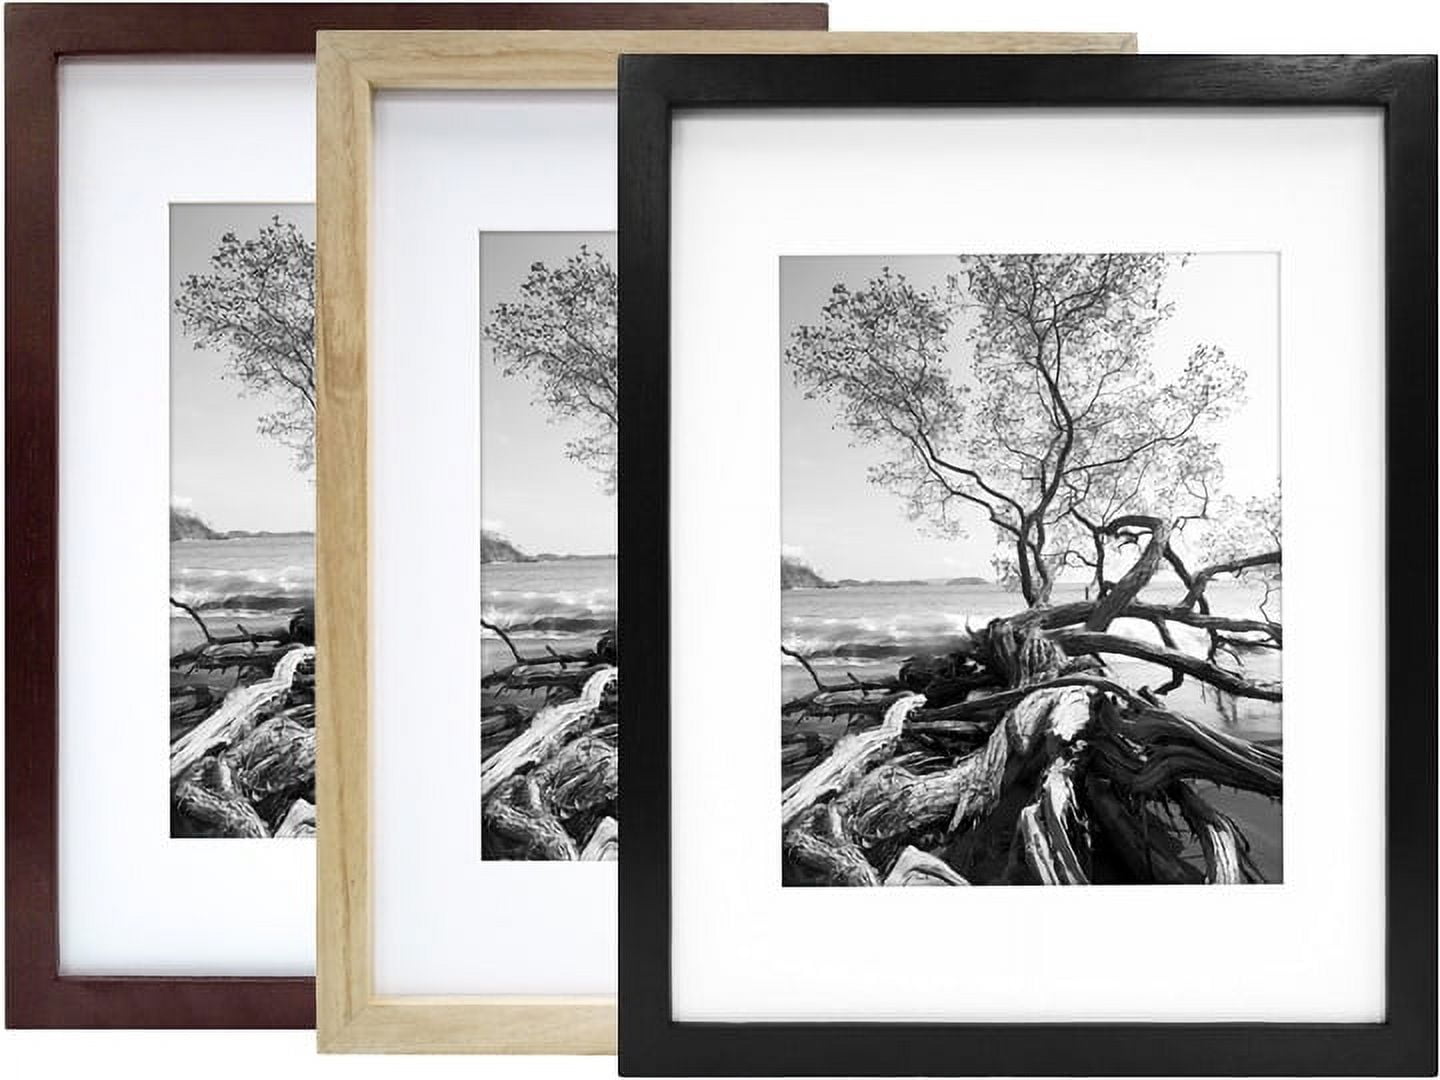 LUCKYLIFE 16x20 Frames, 16x20 Picture Frame for Wall, Display Pictures  11x14 with Mat or 16x20 without Mat, Pack of 2, Natural Woodgrain